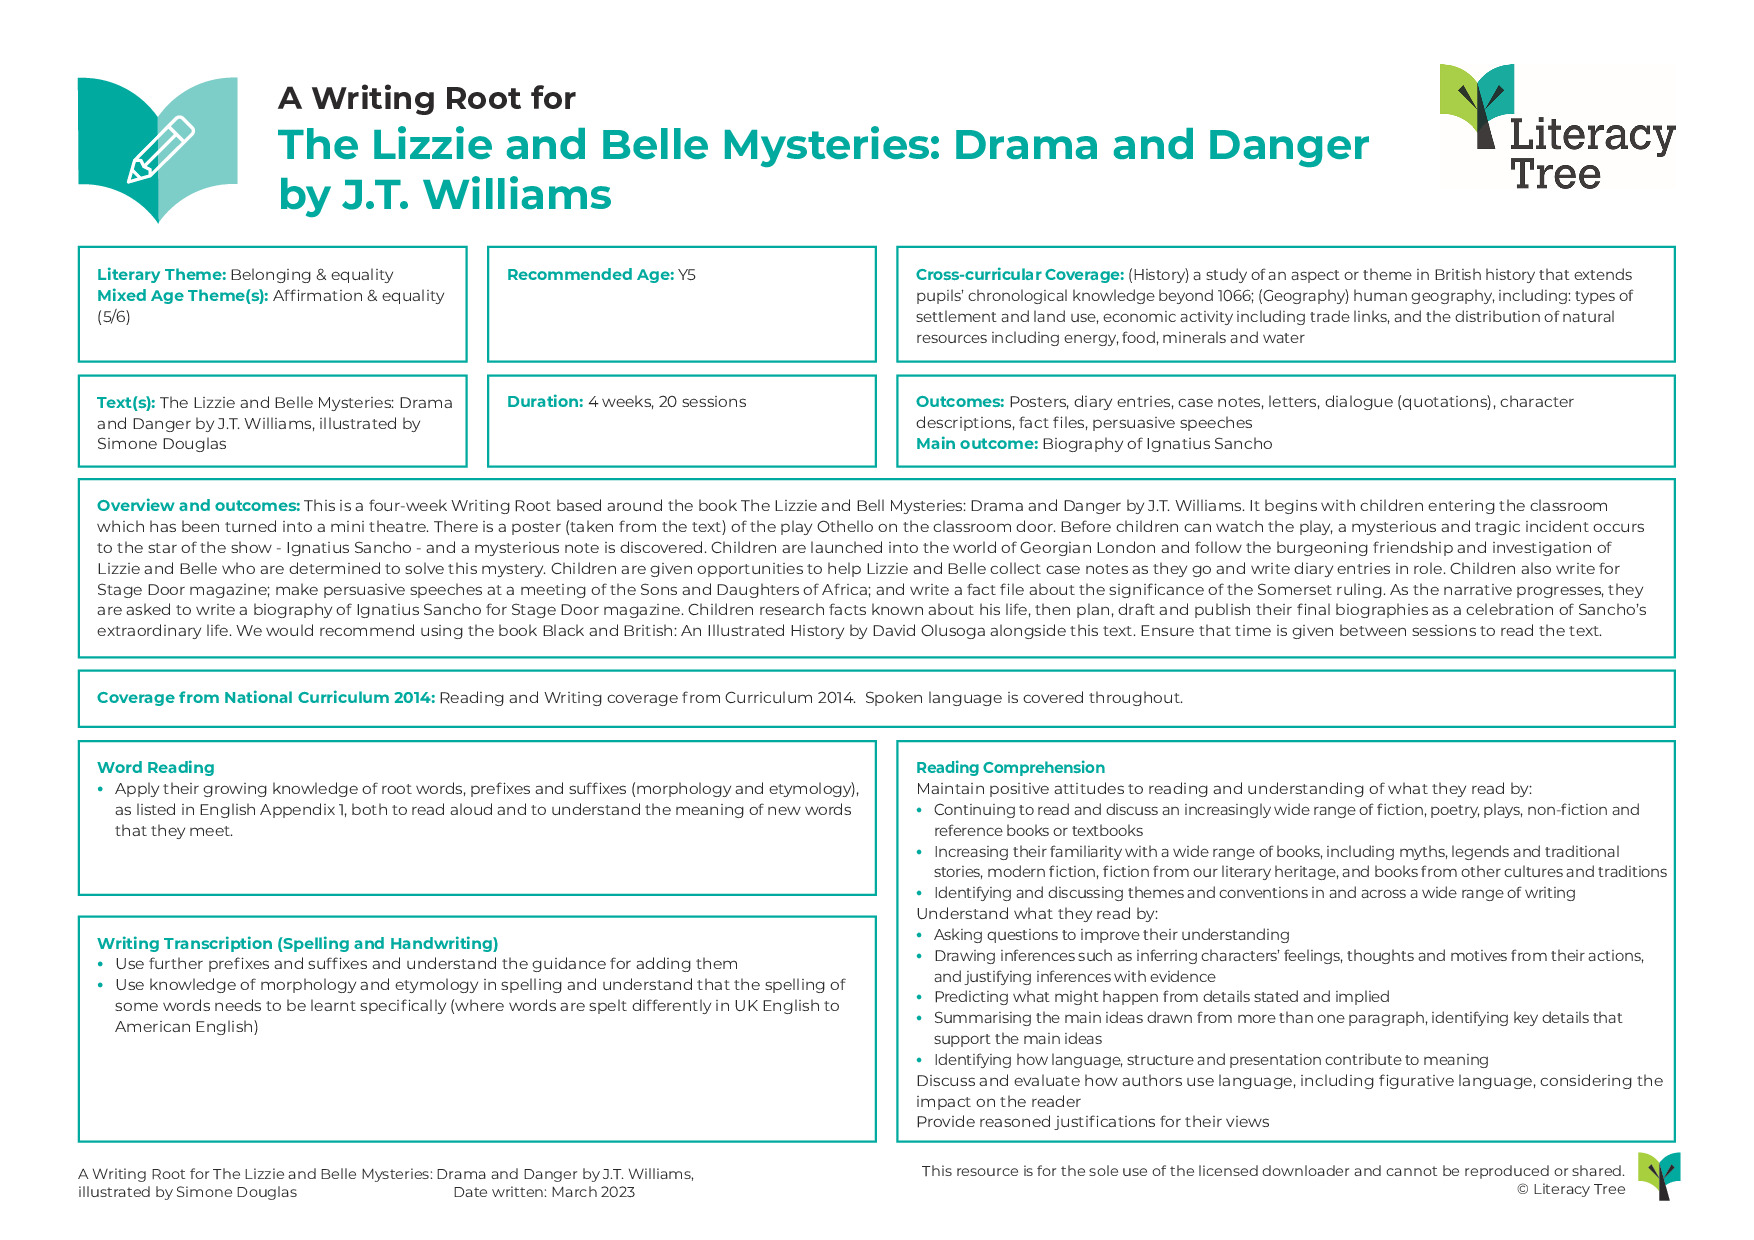 A Writing Root for The Lizzie and Belle Mysteries: Drama and Danger